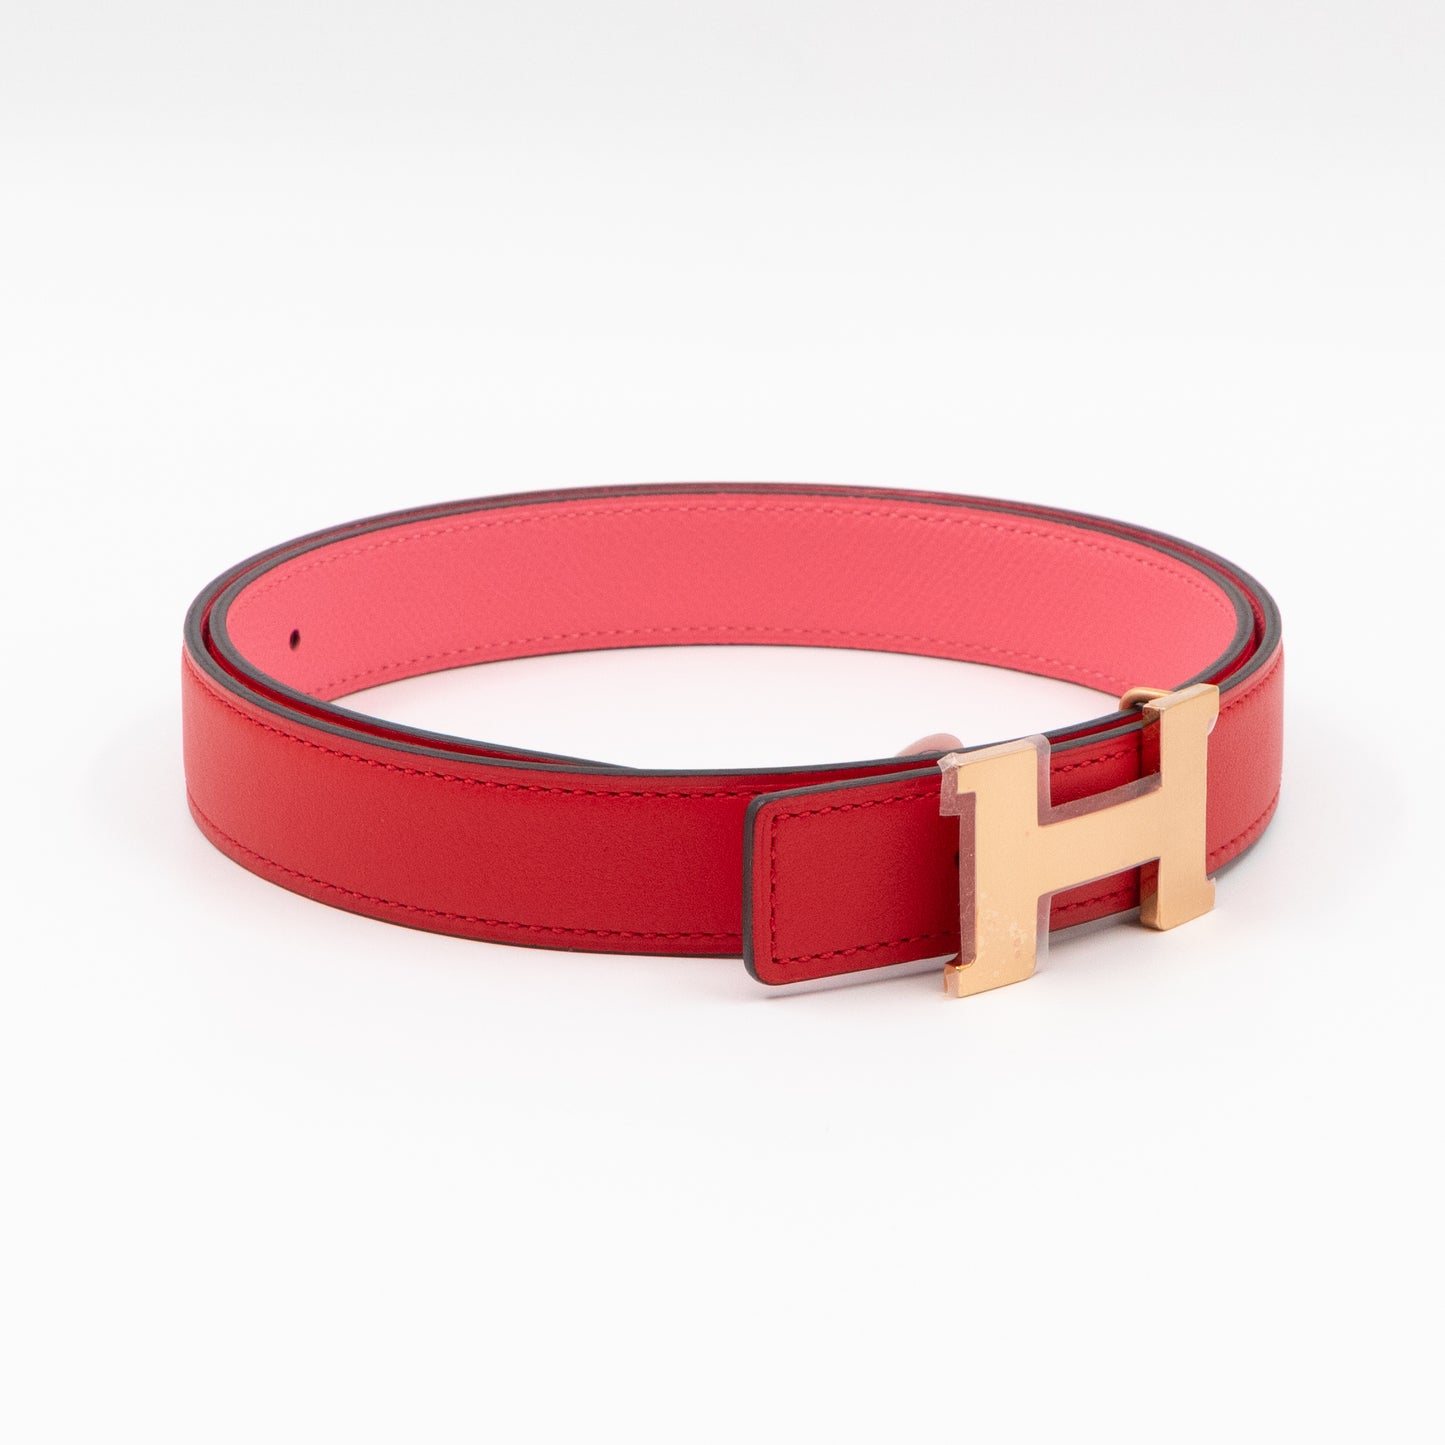 Mini Constance Buckle & Reversible Red and Rose Azalee Leather Belt 75 cm